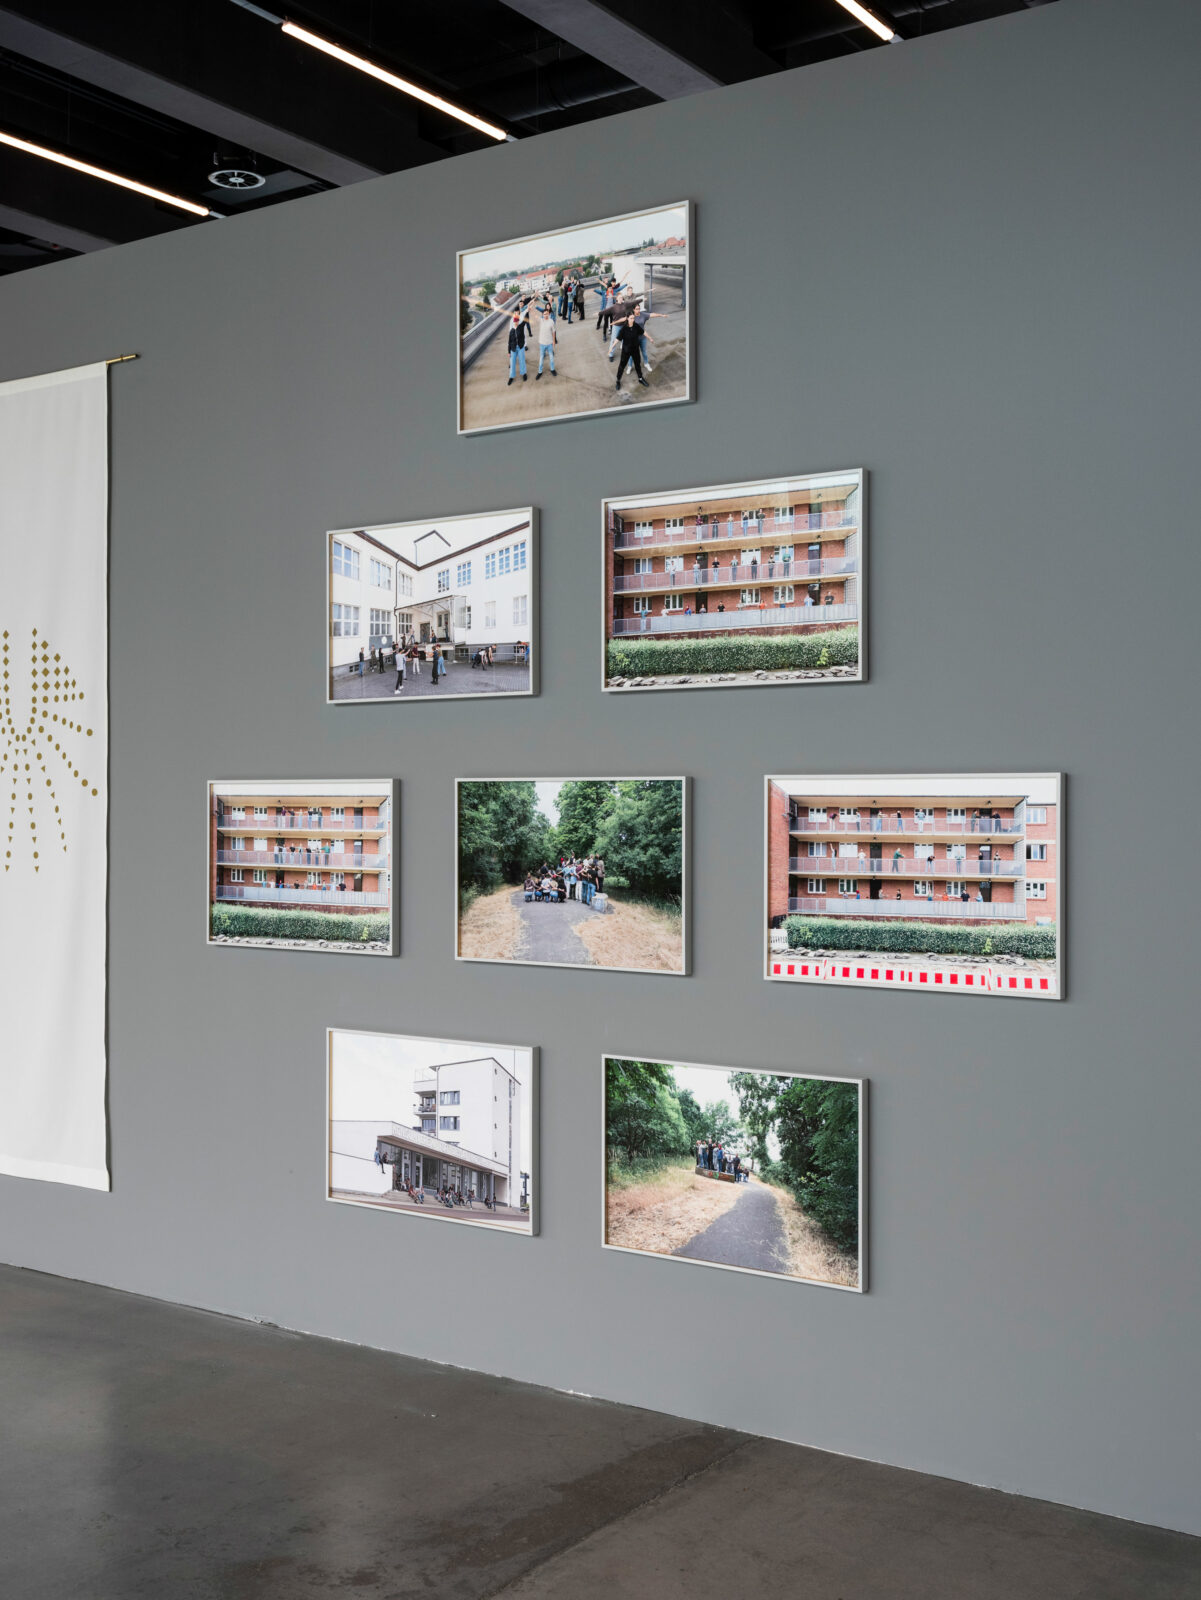 Detailed view of the photo prints by Christina Werner. They show groups of people at various locations in Dessau. 